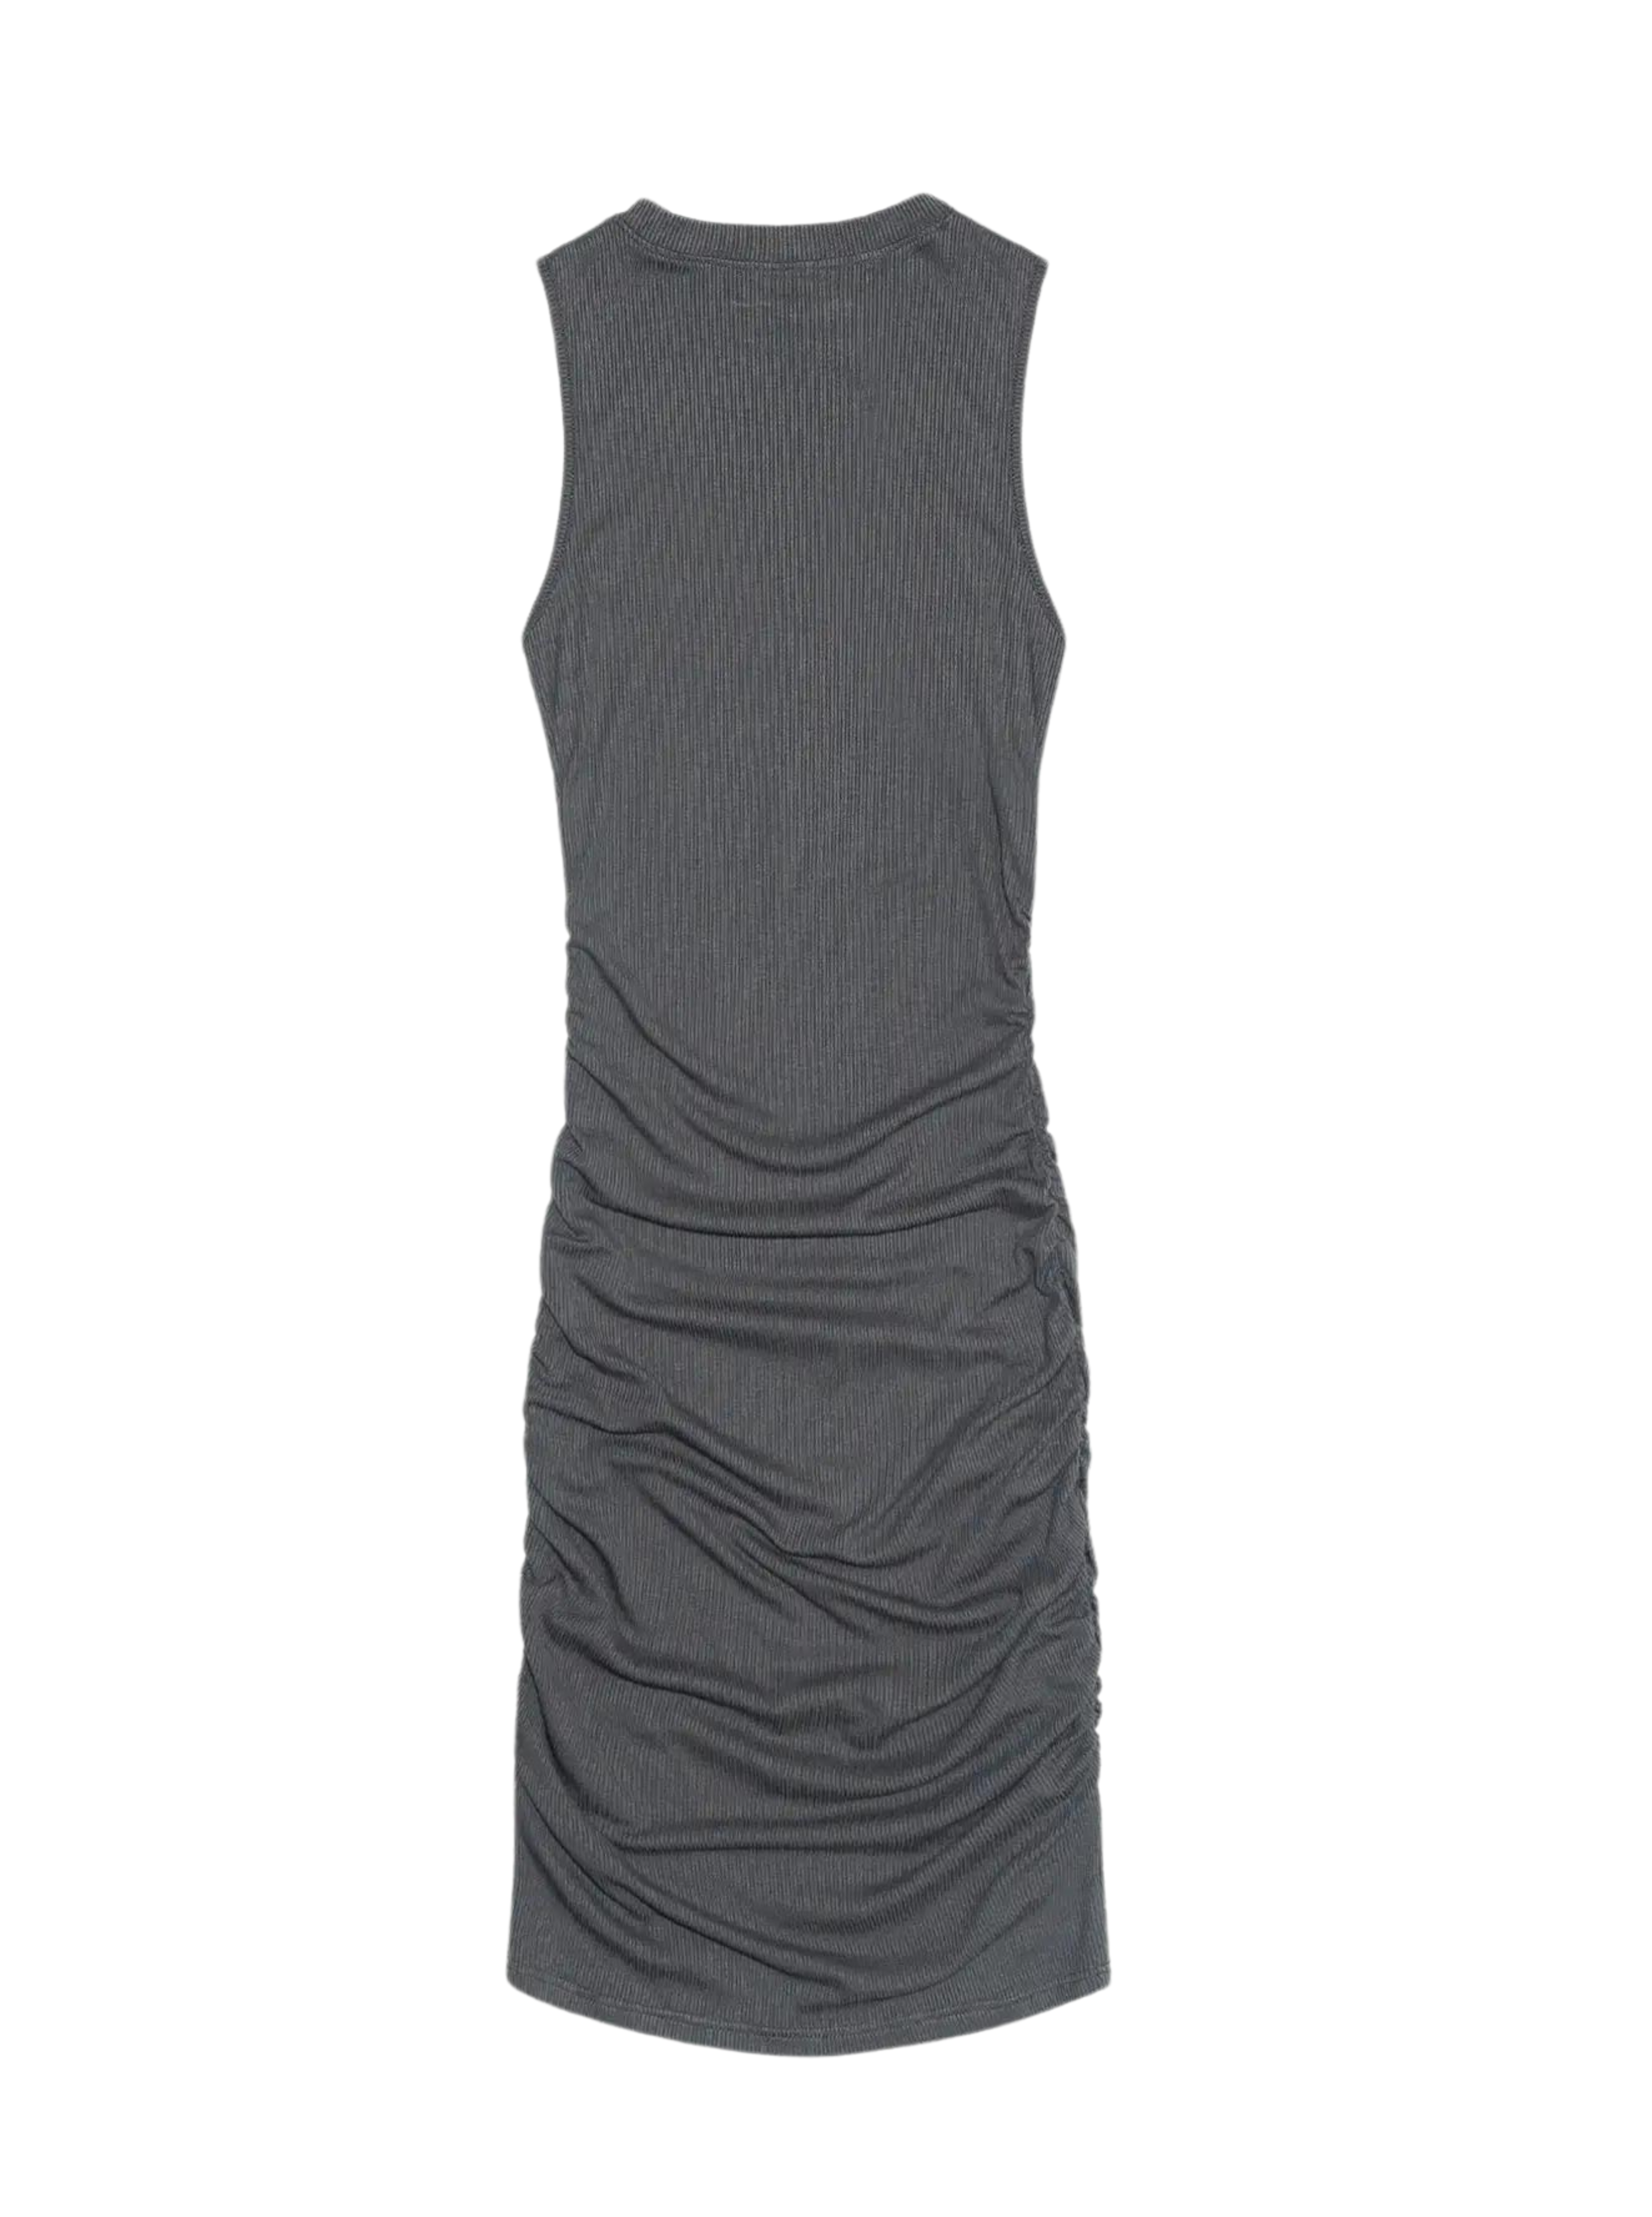 Summer Nights Ruched Bodycon Dress